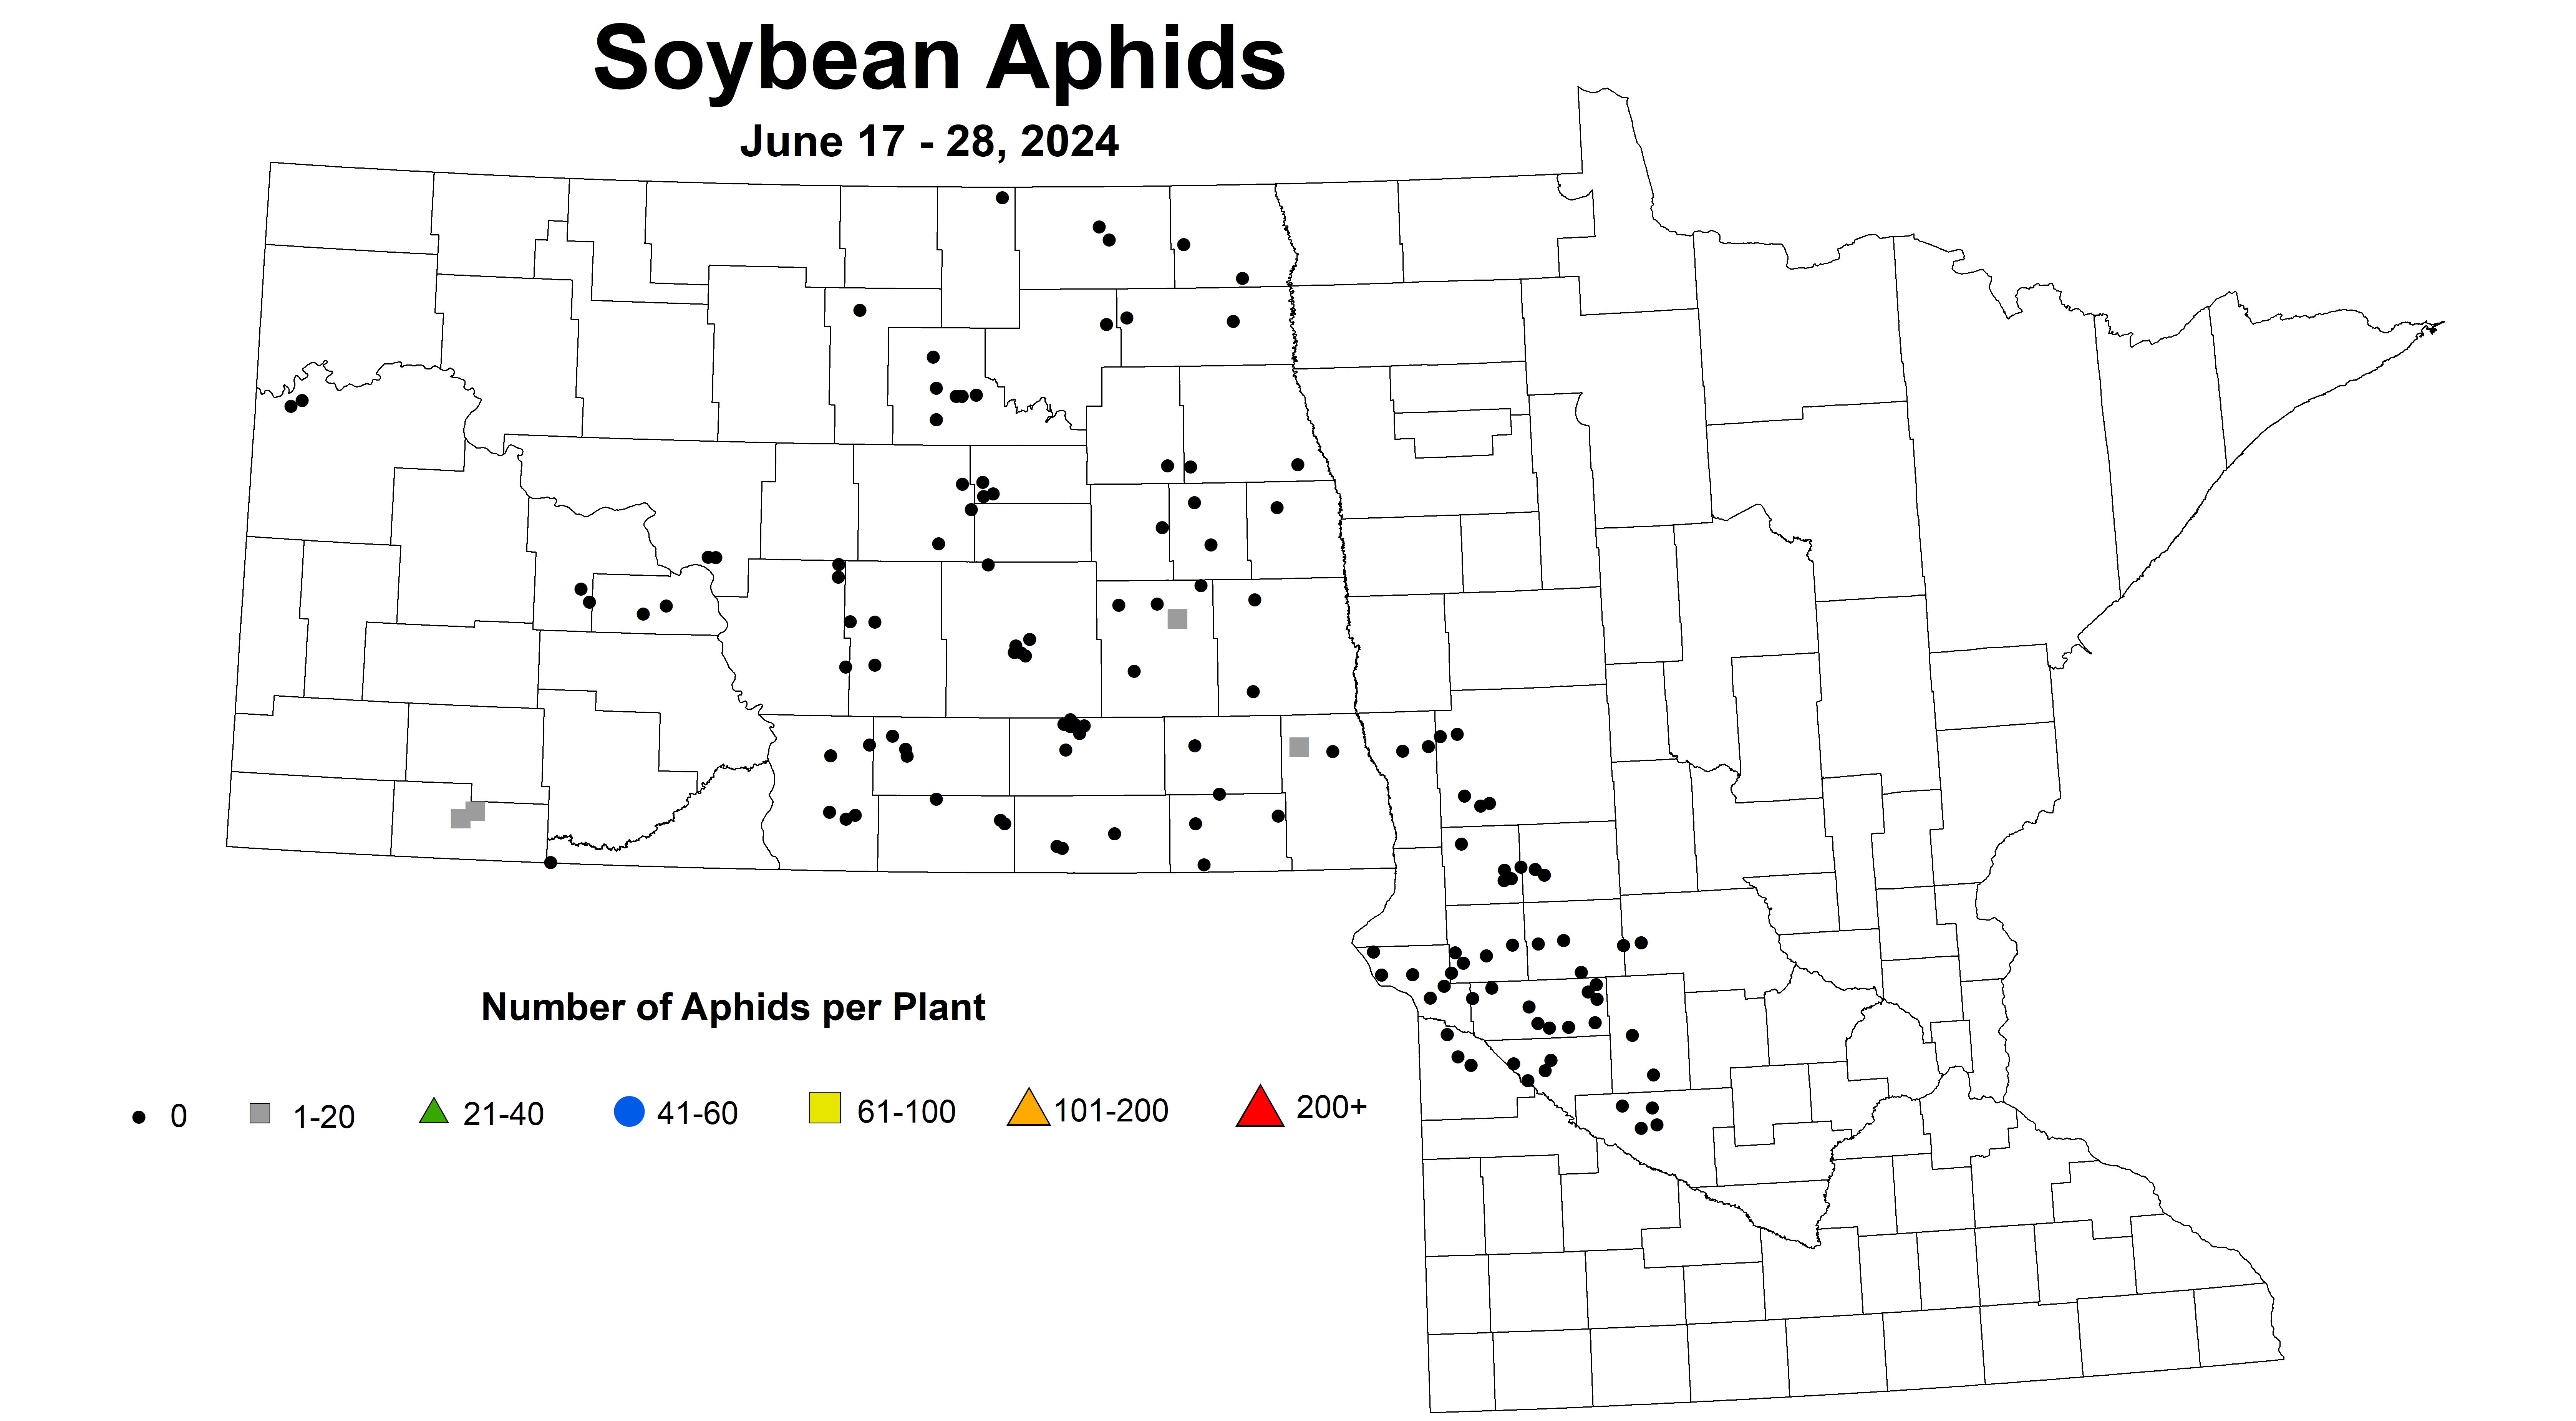 soybean aphid number June 17-28 2024